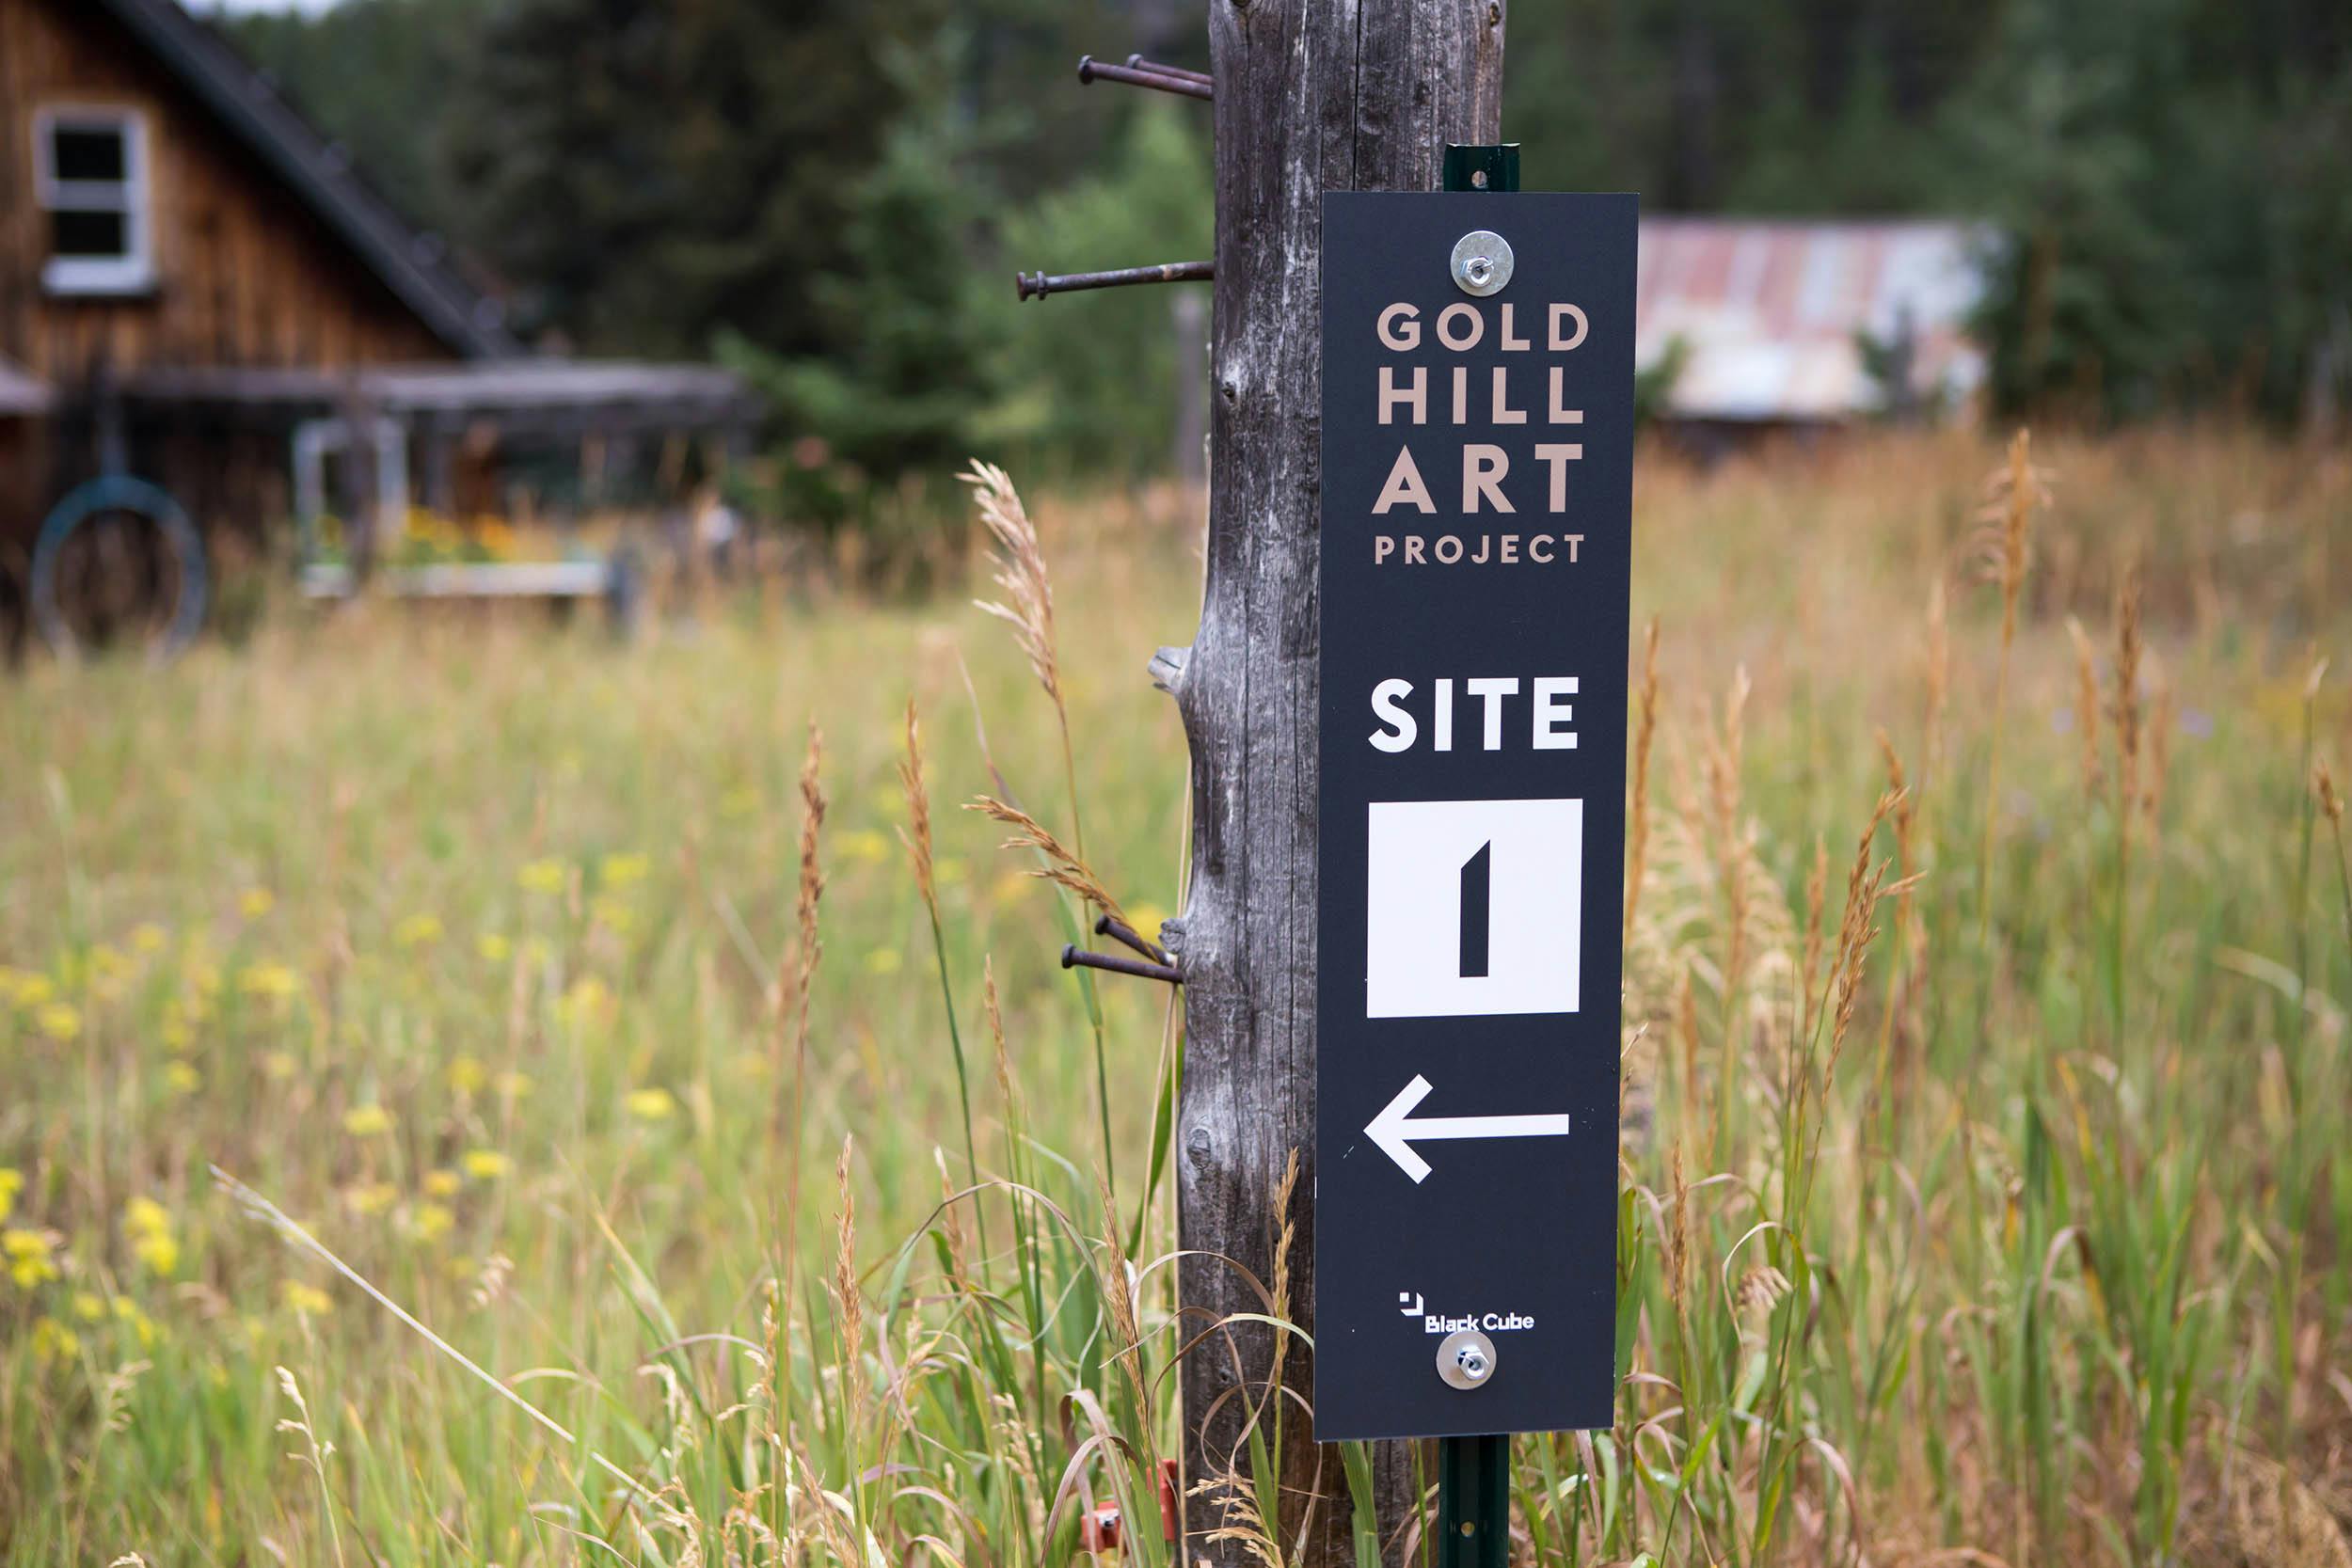 Gold Hill Art Project, 2016. Gold Hill, CO. Courtesy of the artist and Black Cube. Photos by Sara Ford. 